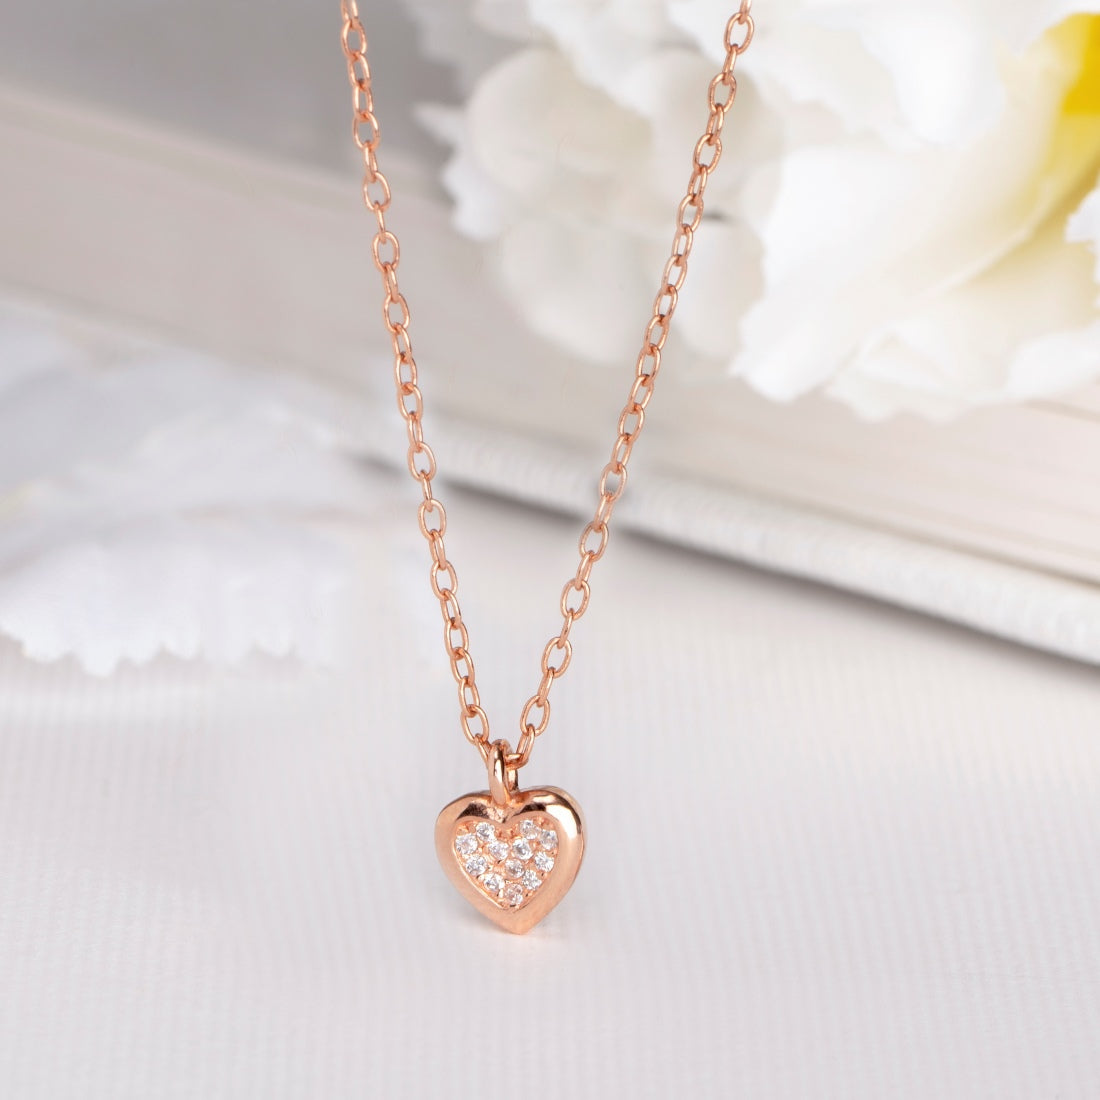 Radiant Rose Gold Heartfelt Embrace CZ 925 Sterling Silver Pendant with Chain